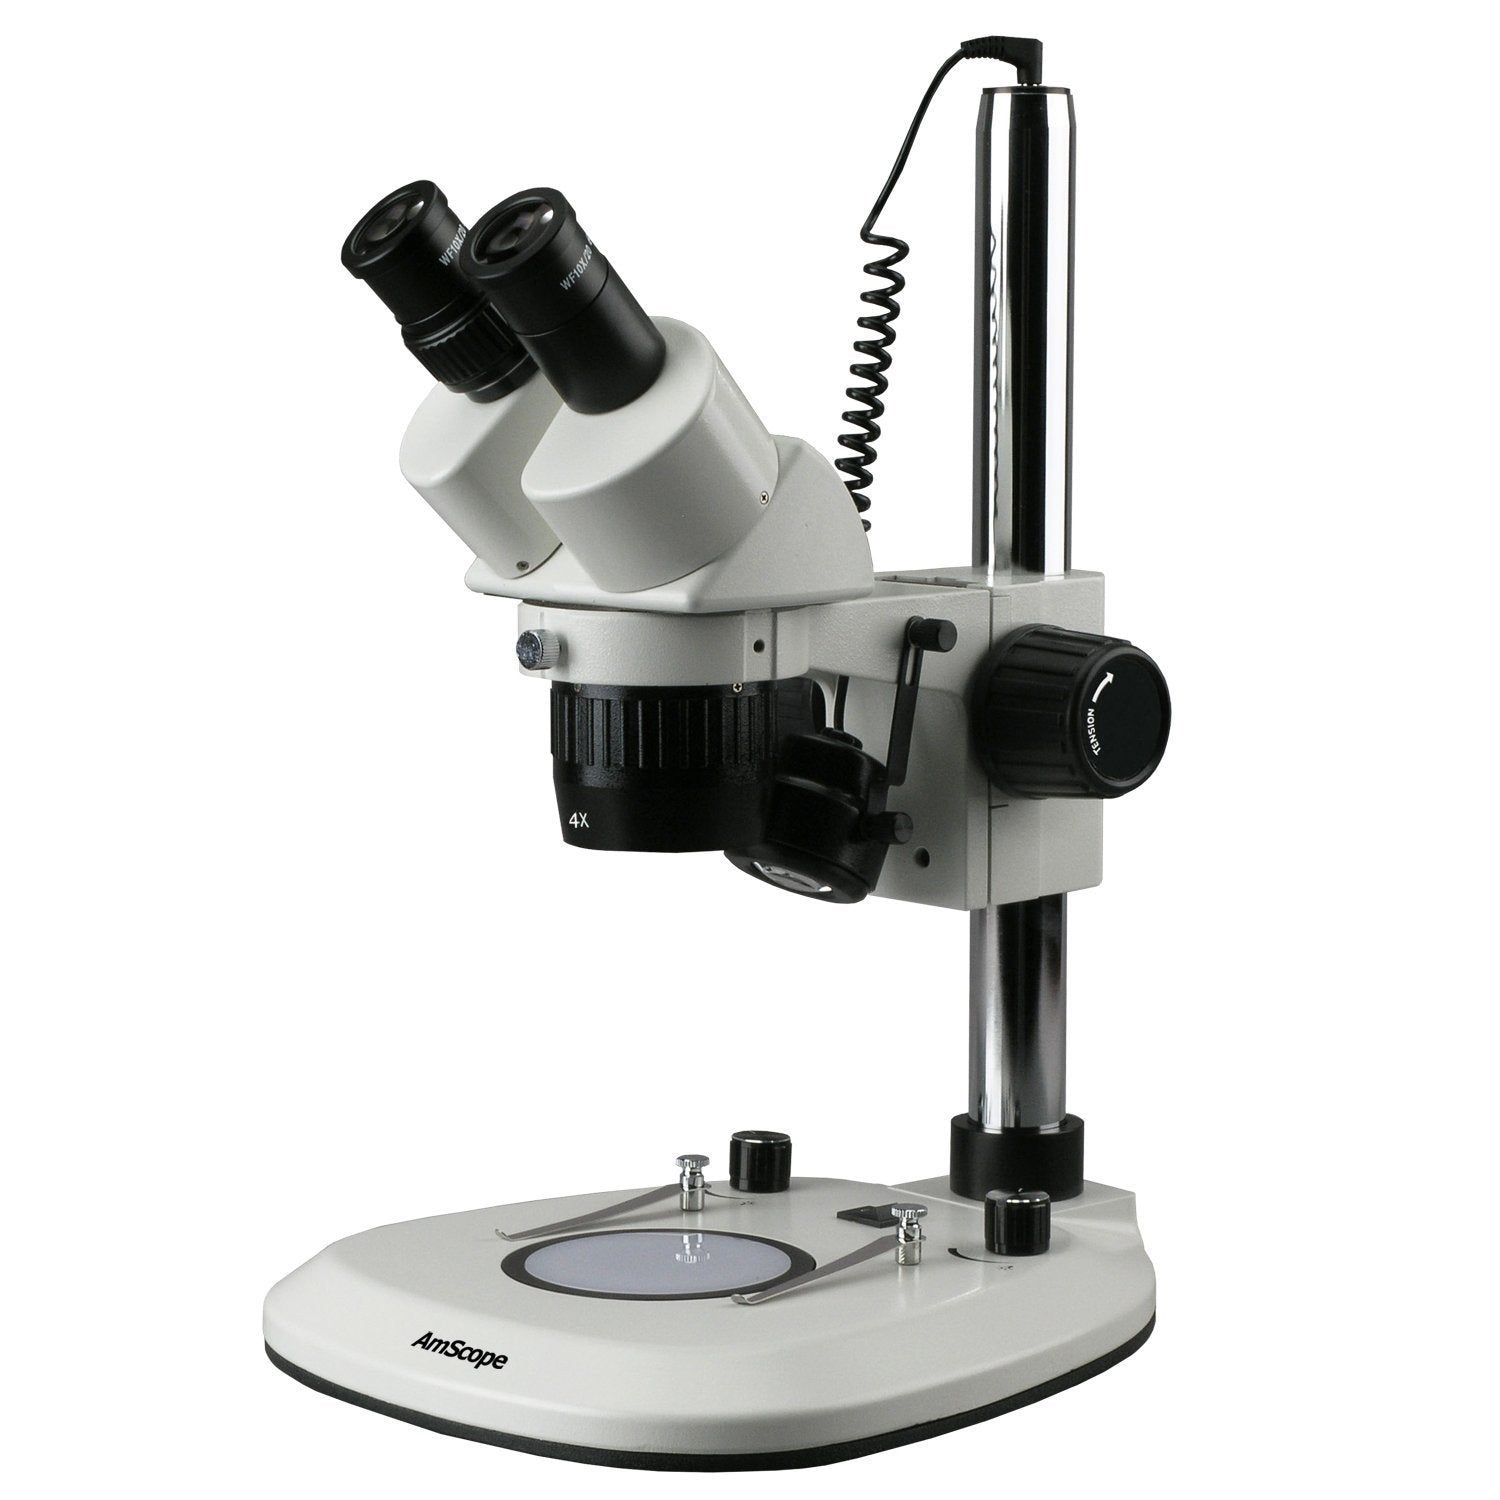 AmScope 10X-30X Super Widefield Pillar Stand Stereo Microscope with Top & Bottom LED Lights